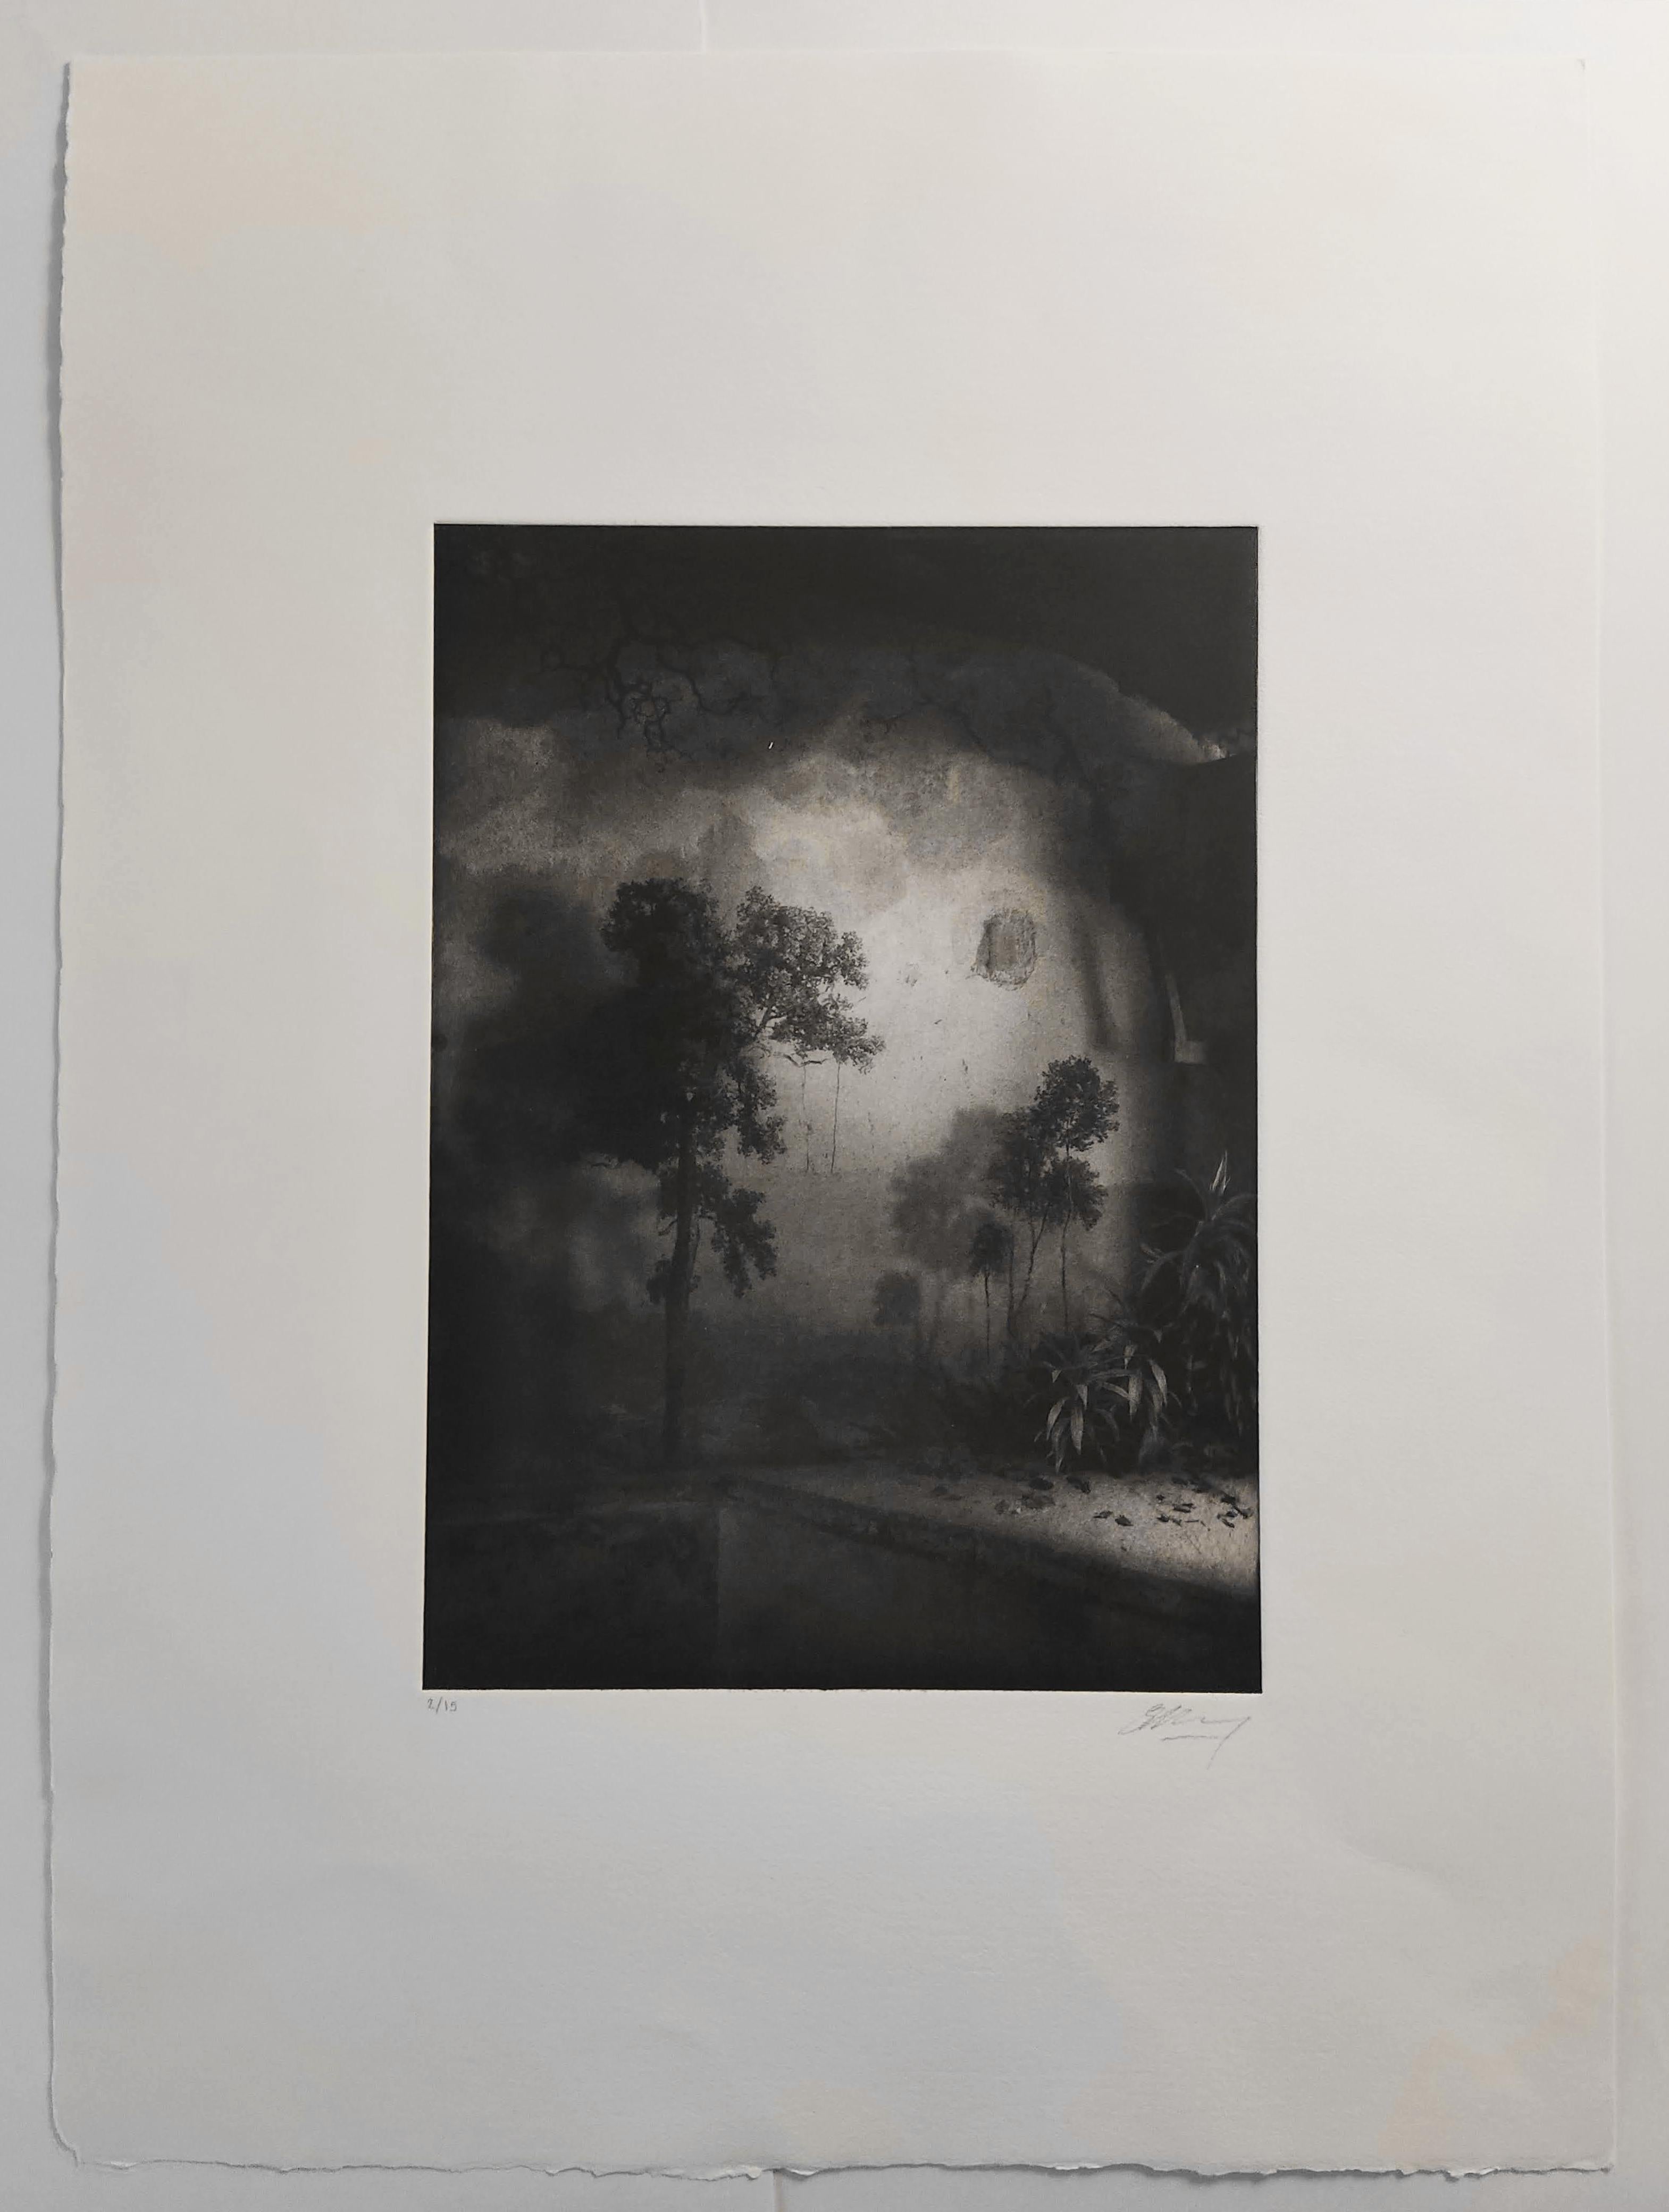 Room with Trees and Vegetation, Interior Photography, Photomontage, Etching - Black Black and White Photograph by Suzanne Moxhay